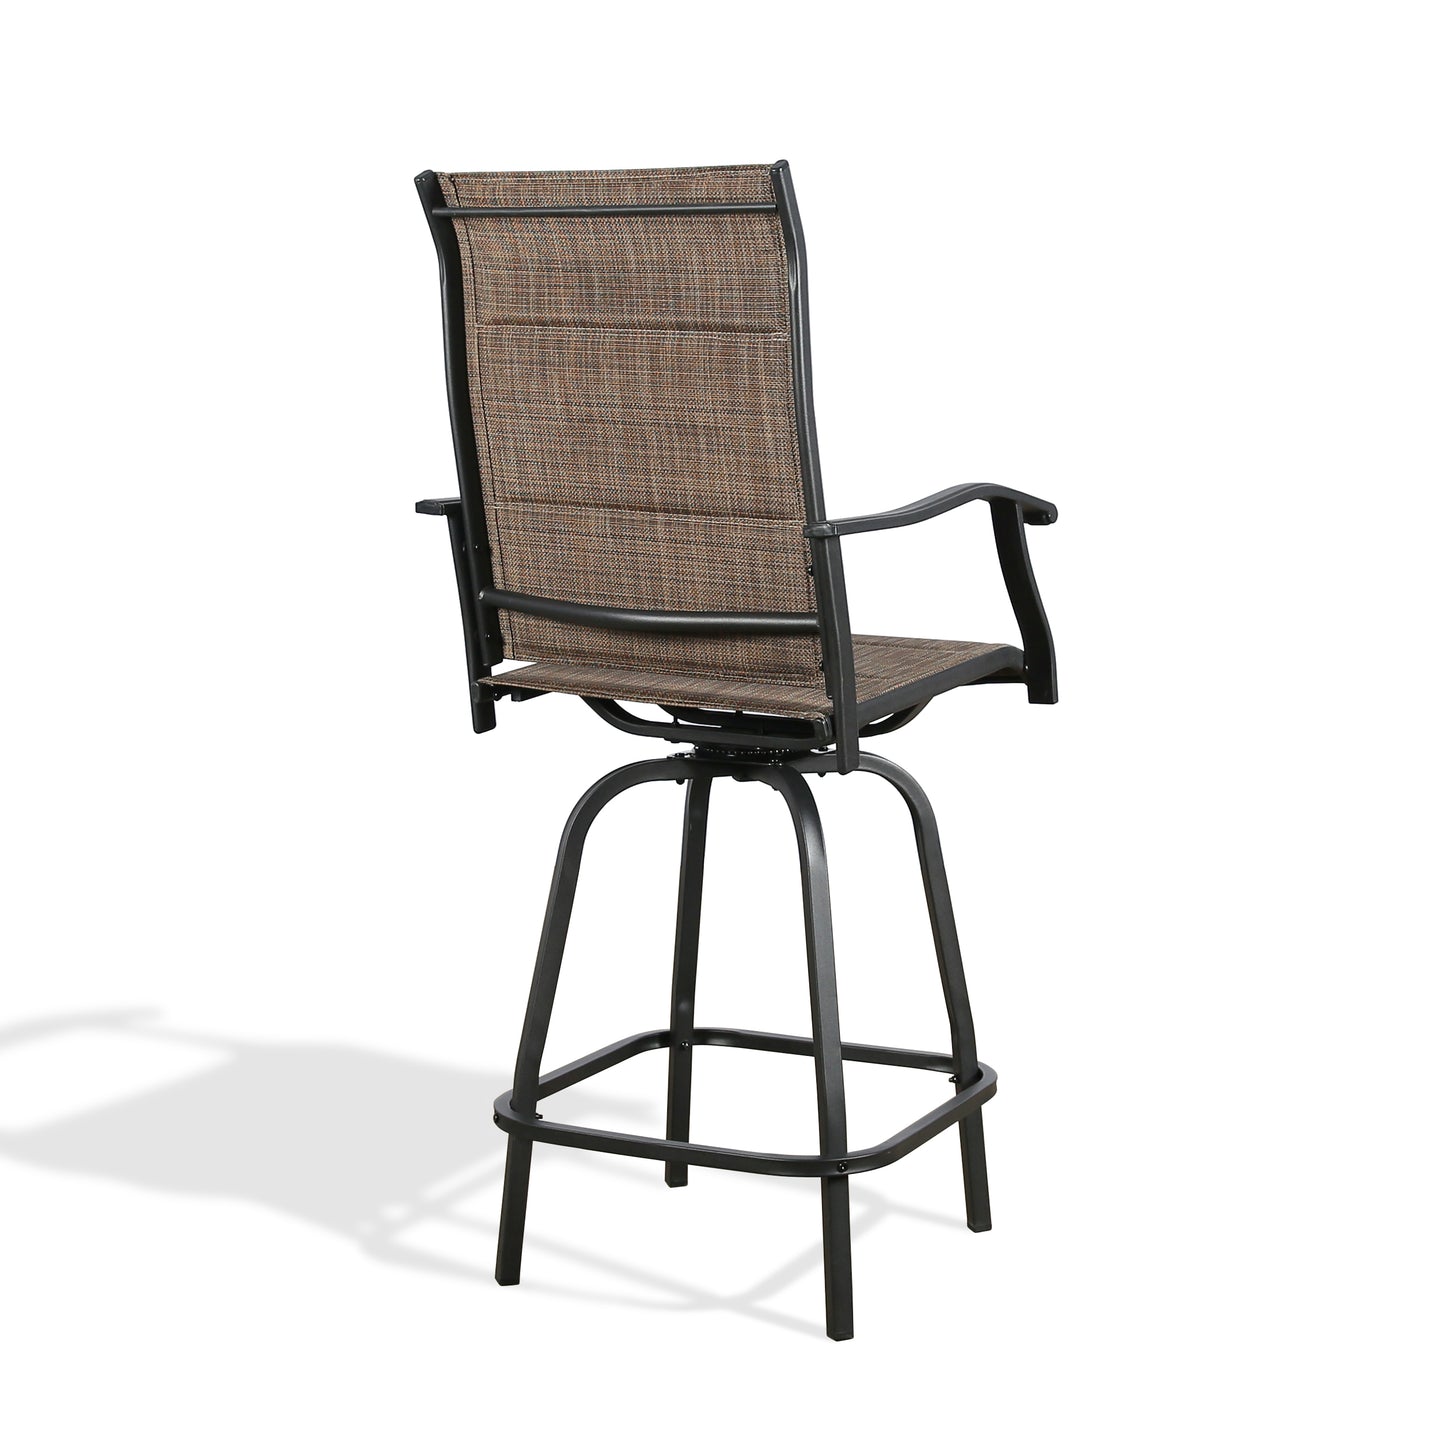 Patio Swivel Bar Stools Bar-Height Outdoor Chairs Padded Textilene, Set of 2